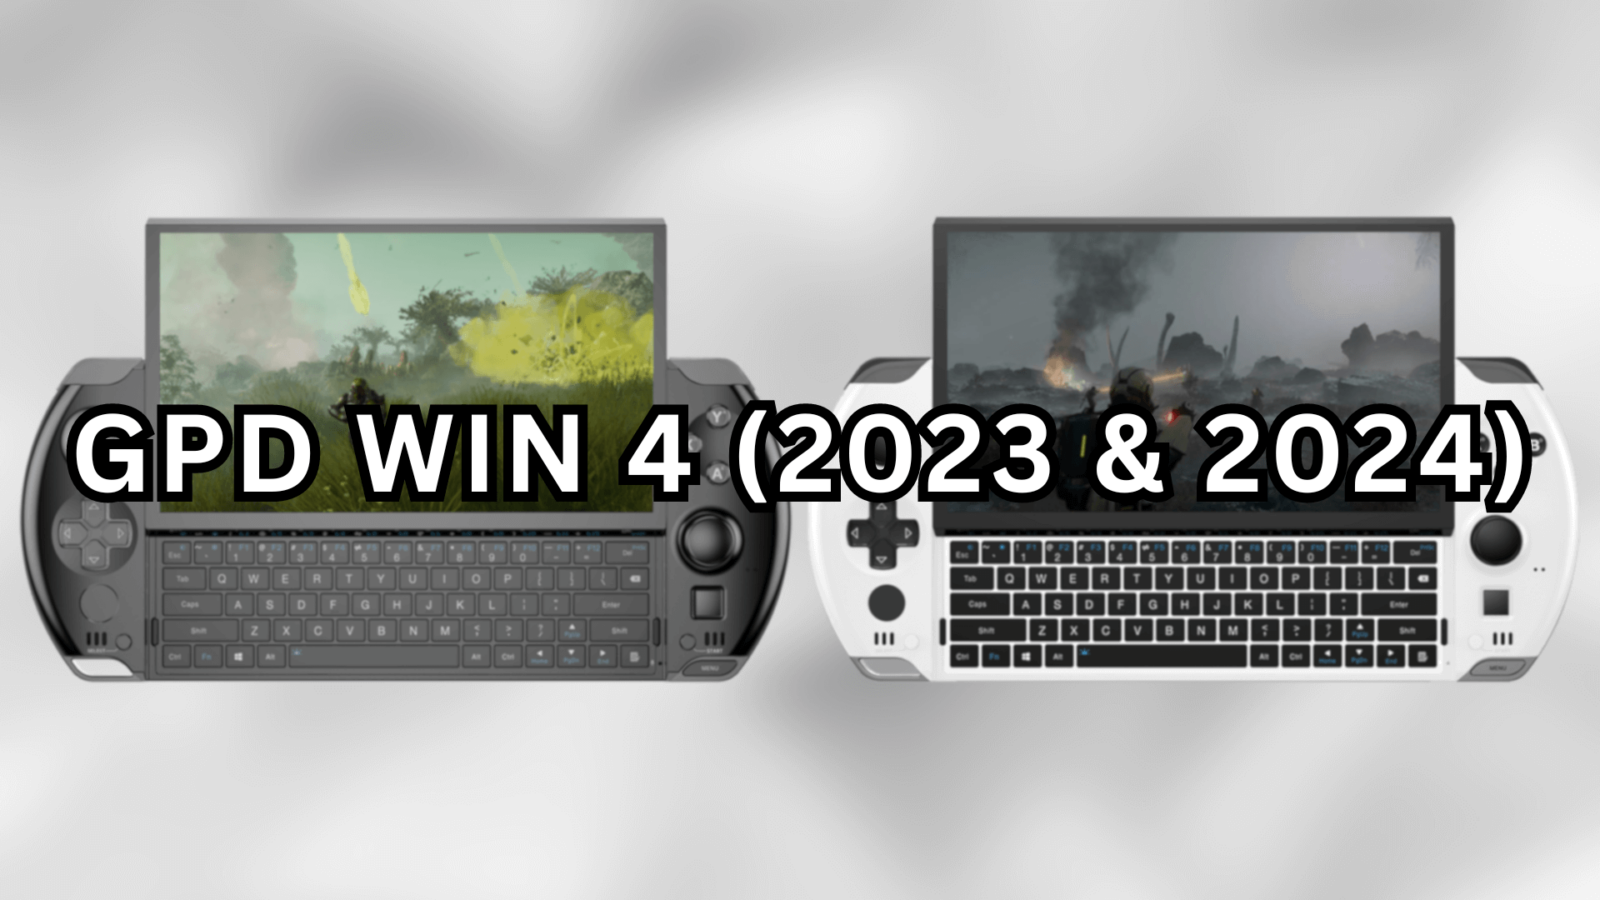 Getting Started with the GPD WIN 4